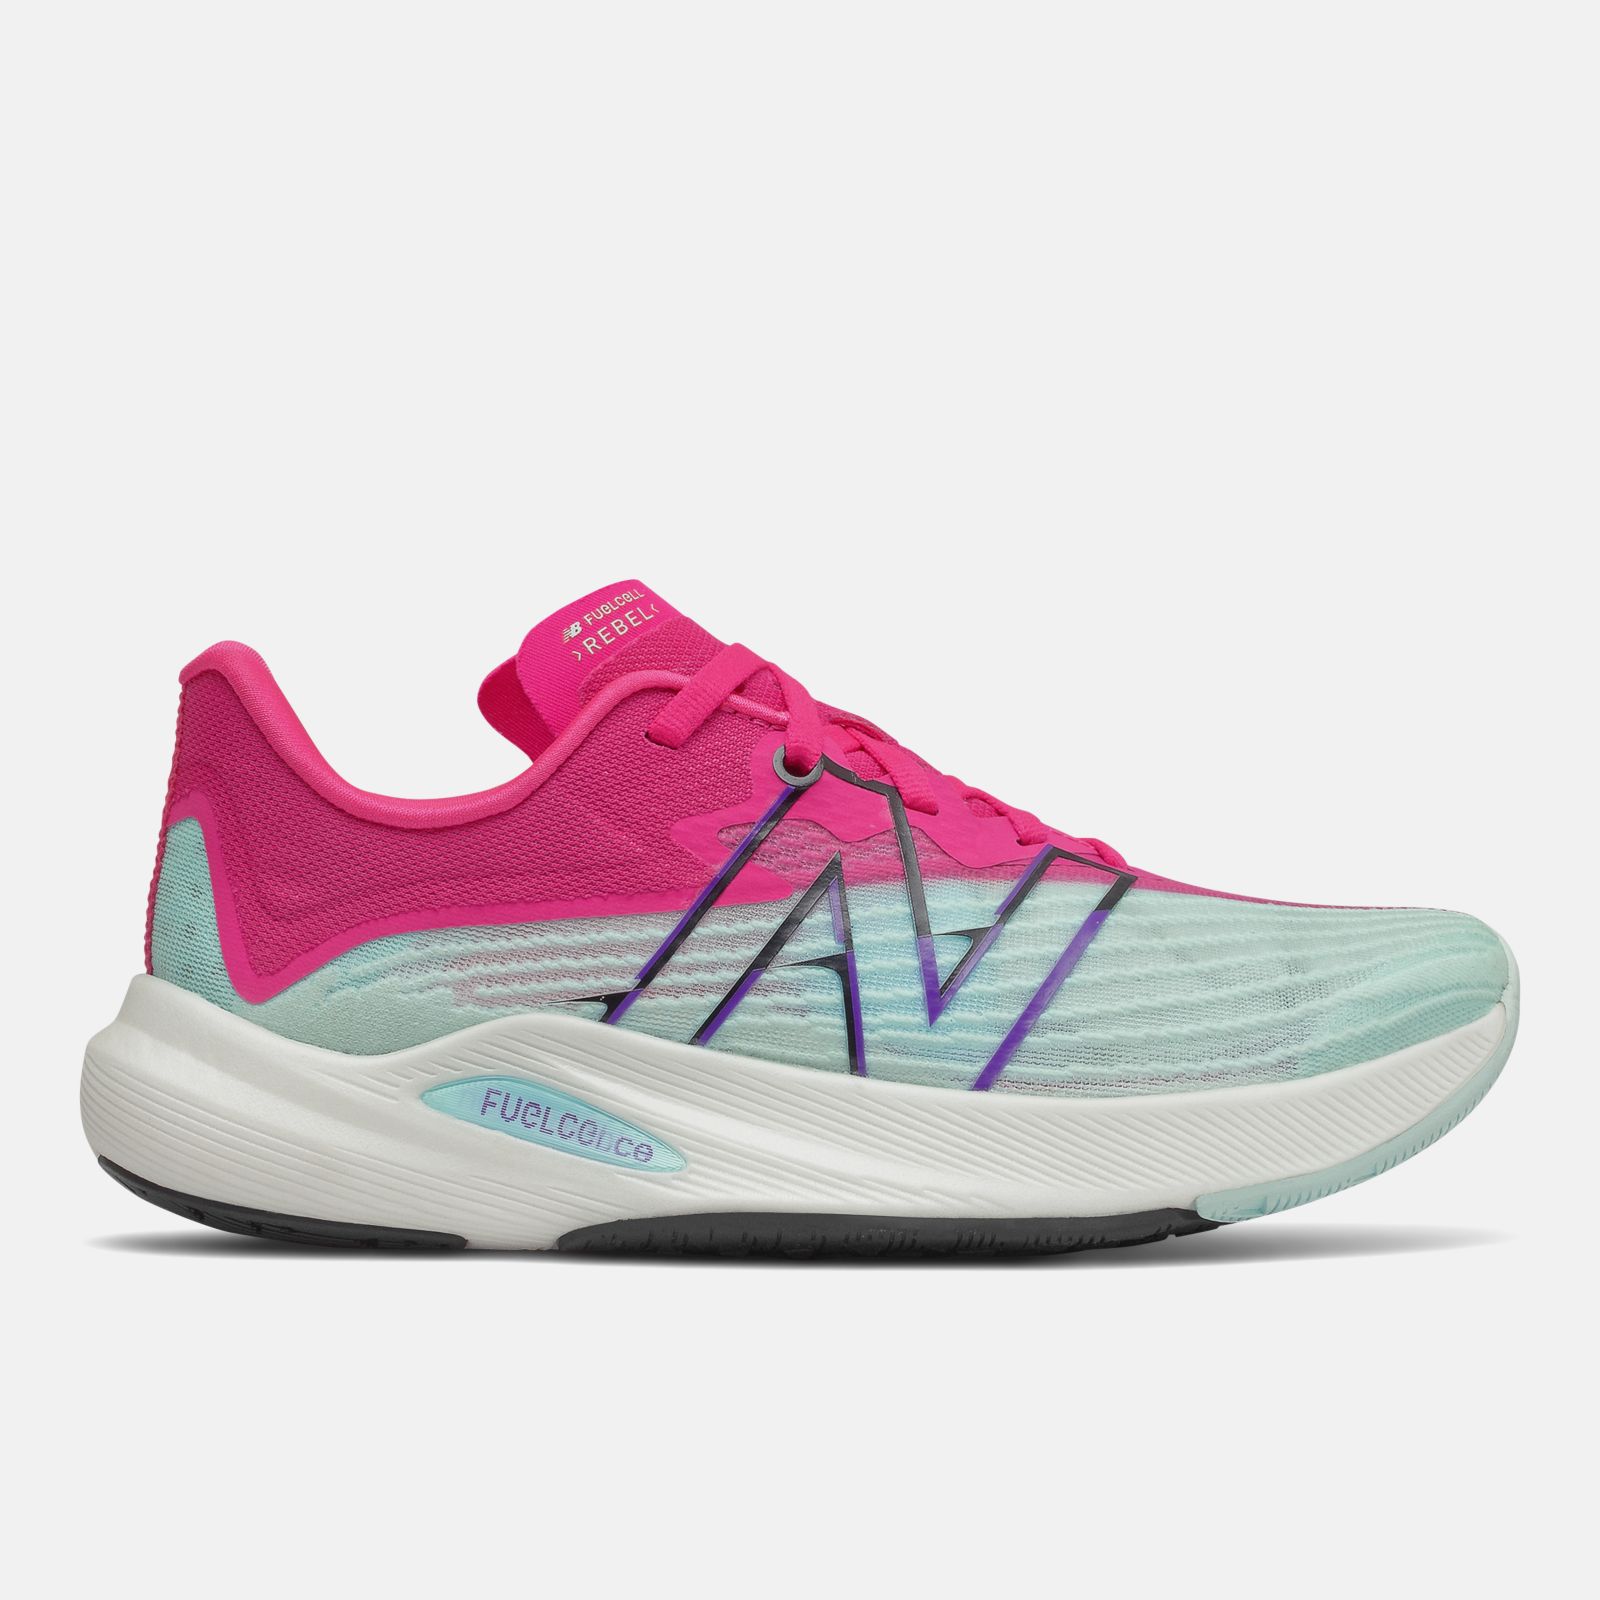 New Balance FuelCell Rebel v2, Pink/Blue, swatch